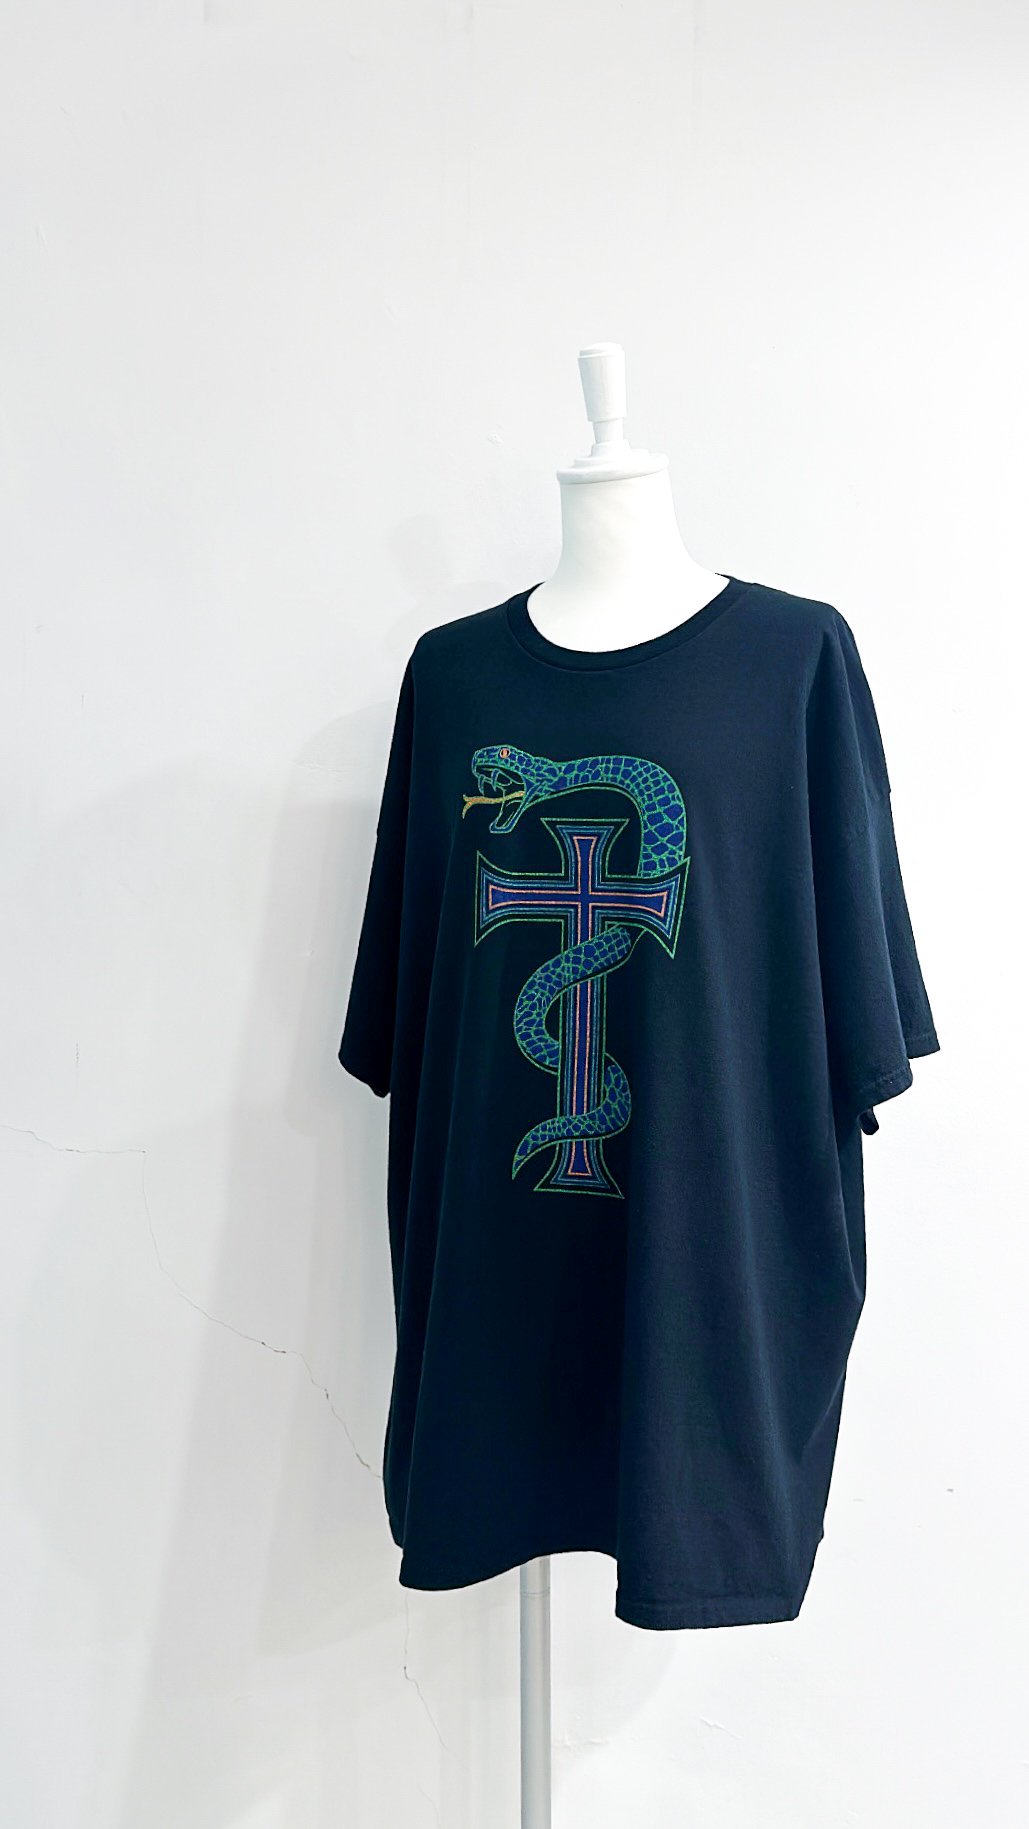 <img class='new_mark_img1' src='https://img.shop-pro.jp/img/new/icons47.gif' style='border:none;display:inline;margin:0px;padding:0px;width:auto;' />OVERSIZED PRINT T-SHIRT